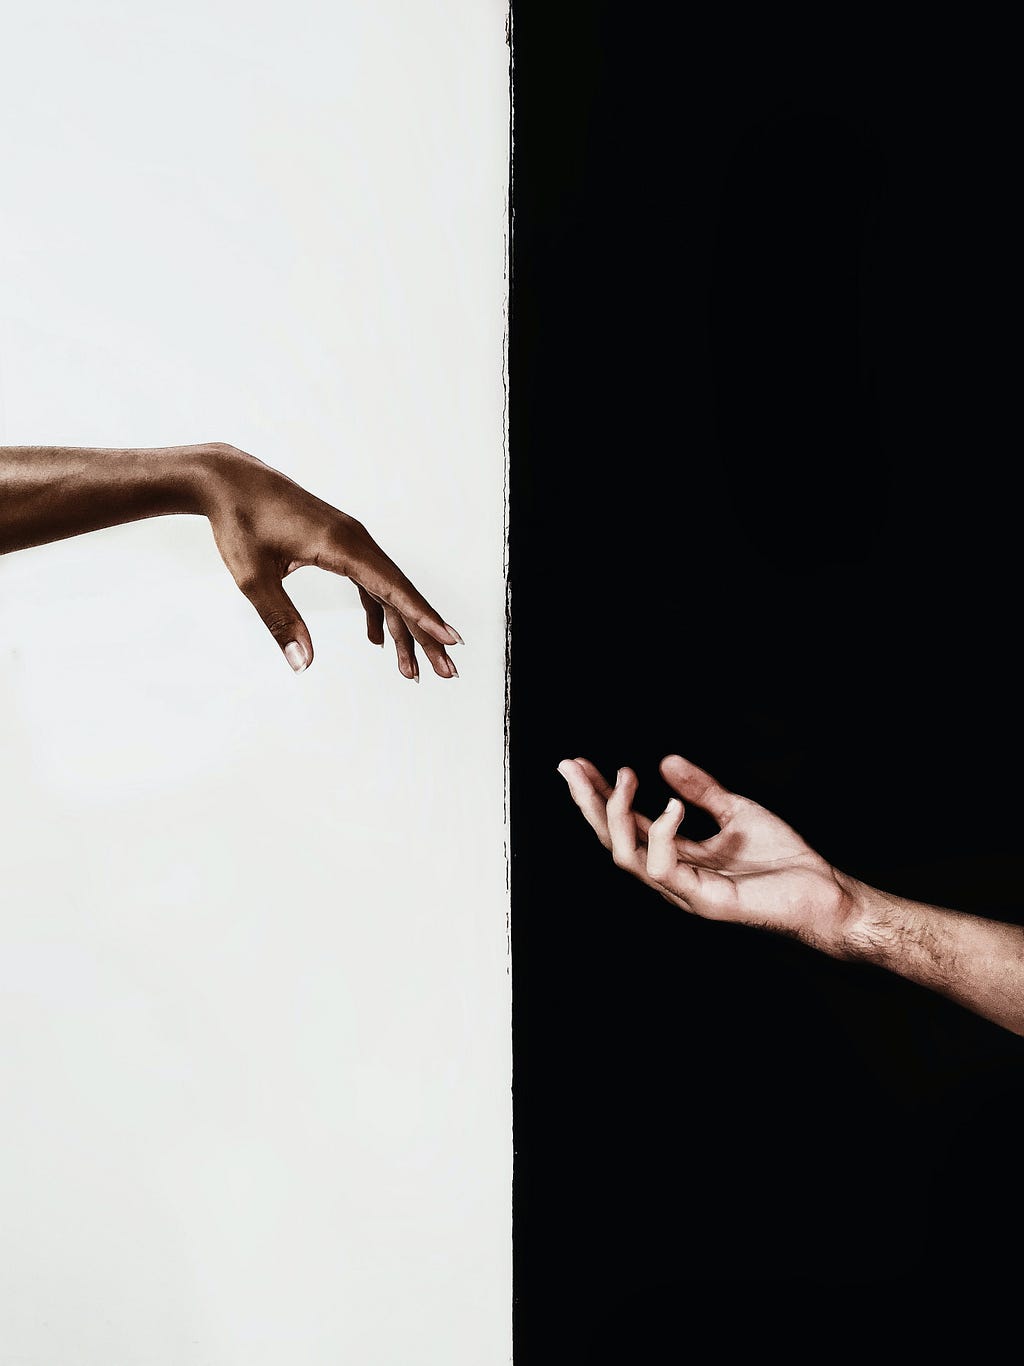 Two arms reaching out to each other. One arm has a white background, while the other has a black background.